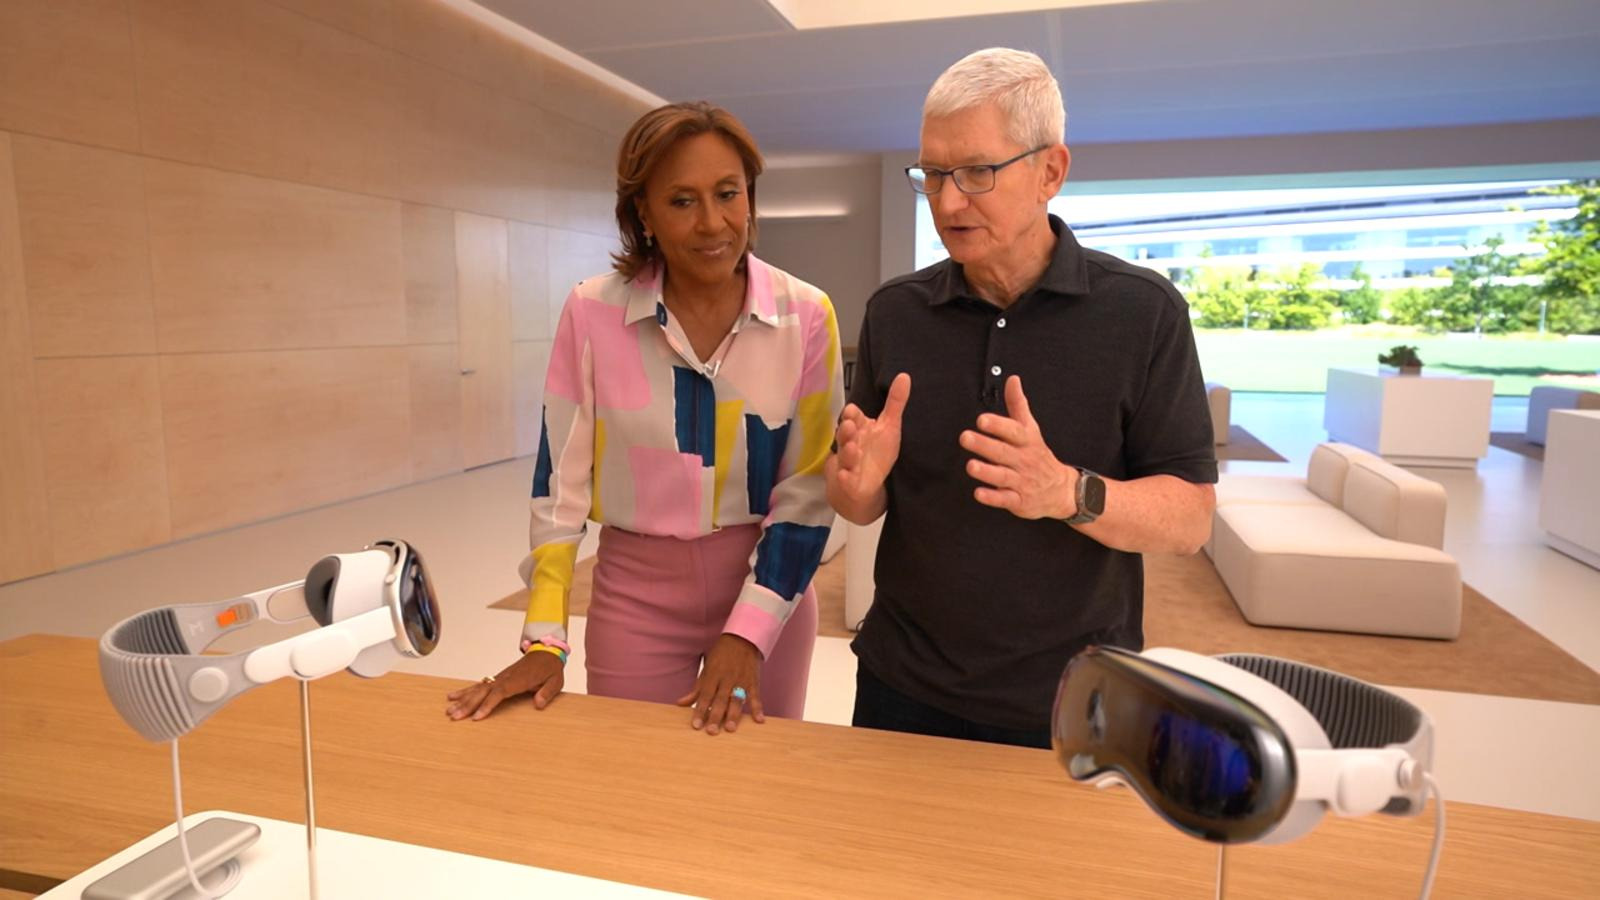 Tim Cook admits that the Vision Pro is not within everyone's reach, but the price is justified by the technology

